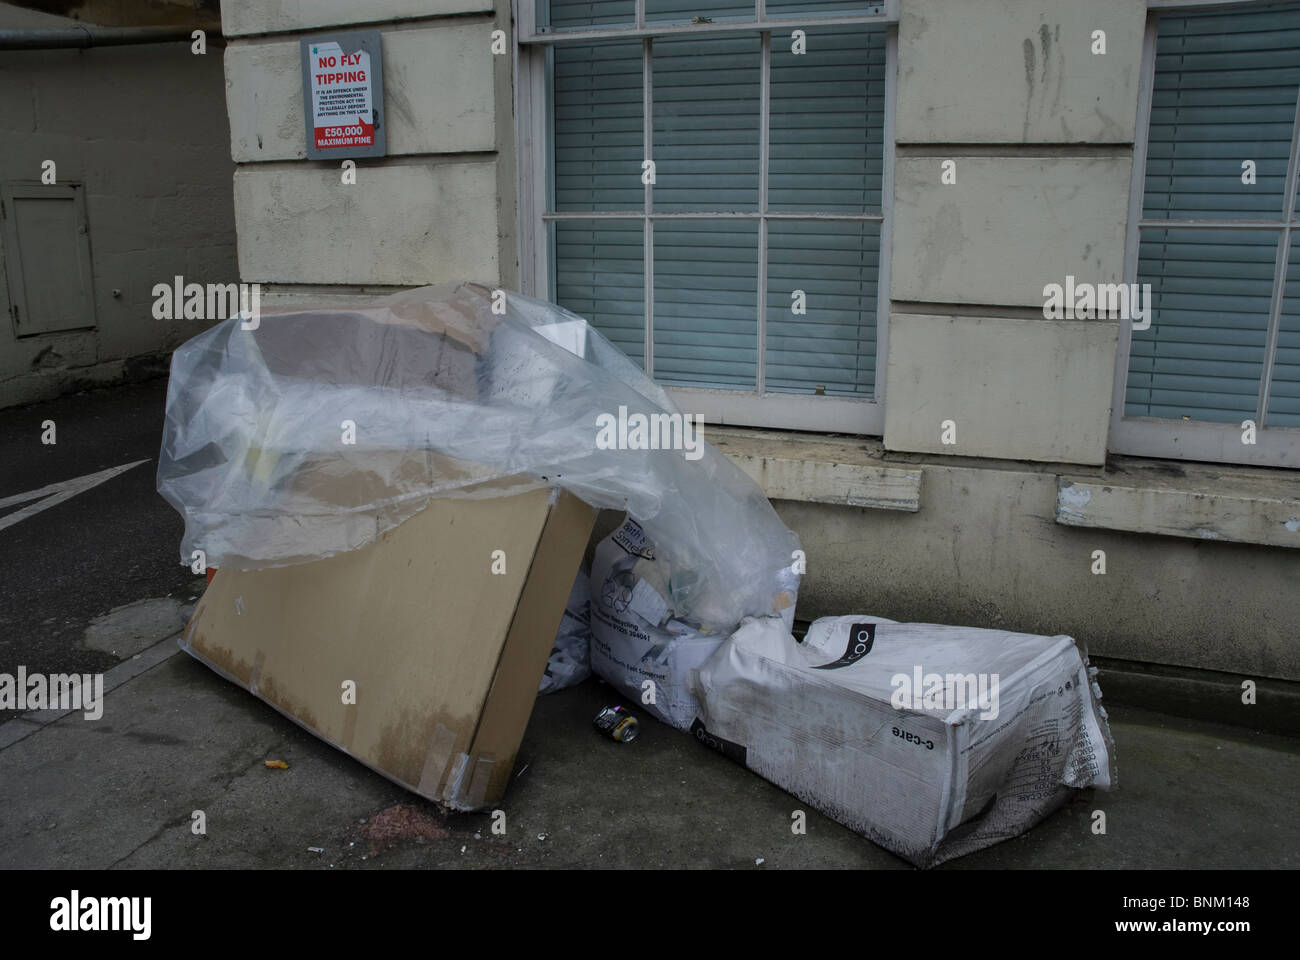 Fly tipping under a sign saying no fly tipping, on the London Road, Bath Somerset UK Stock Photo